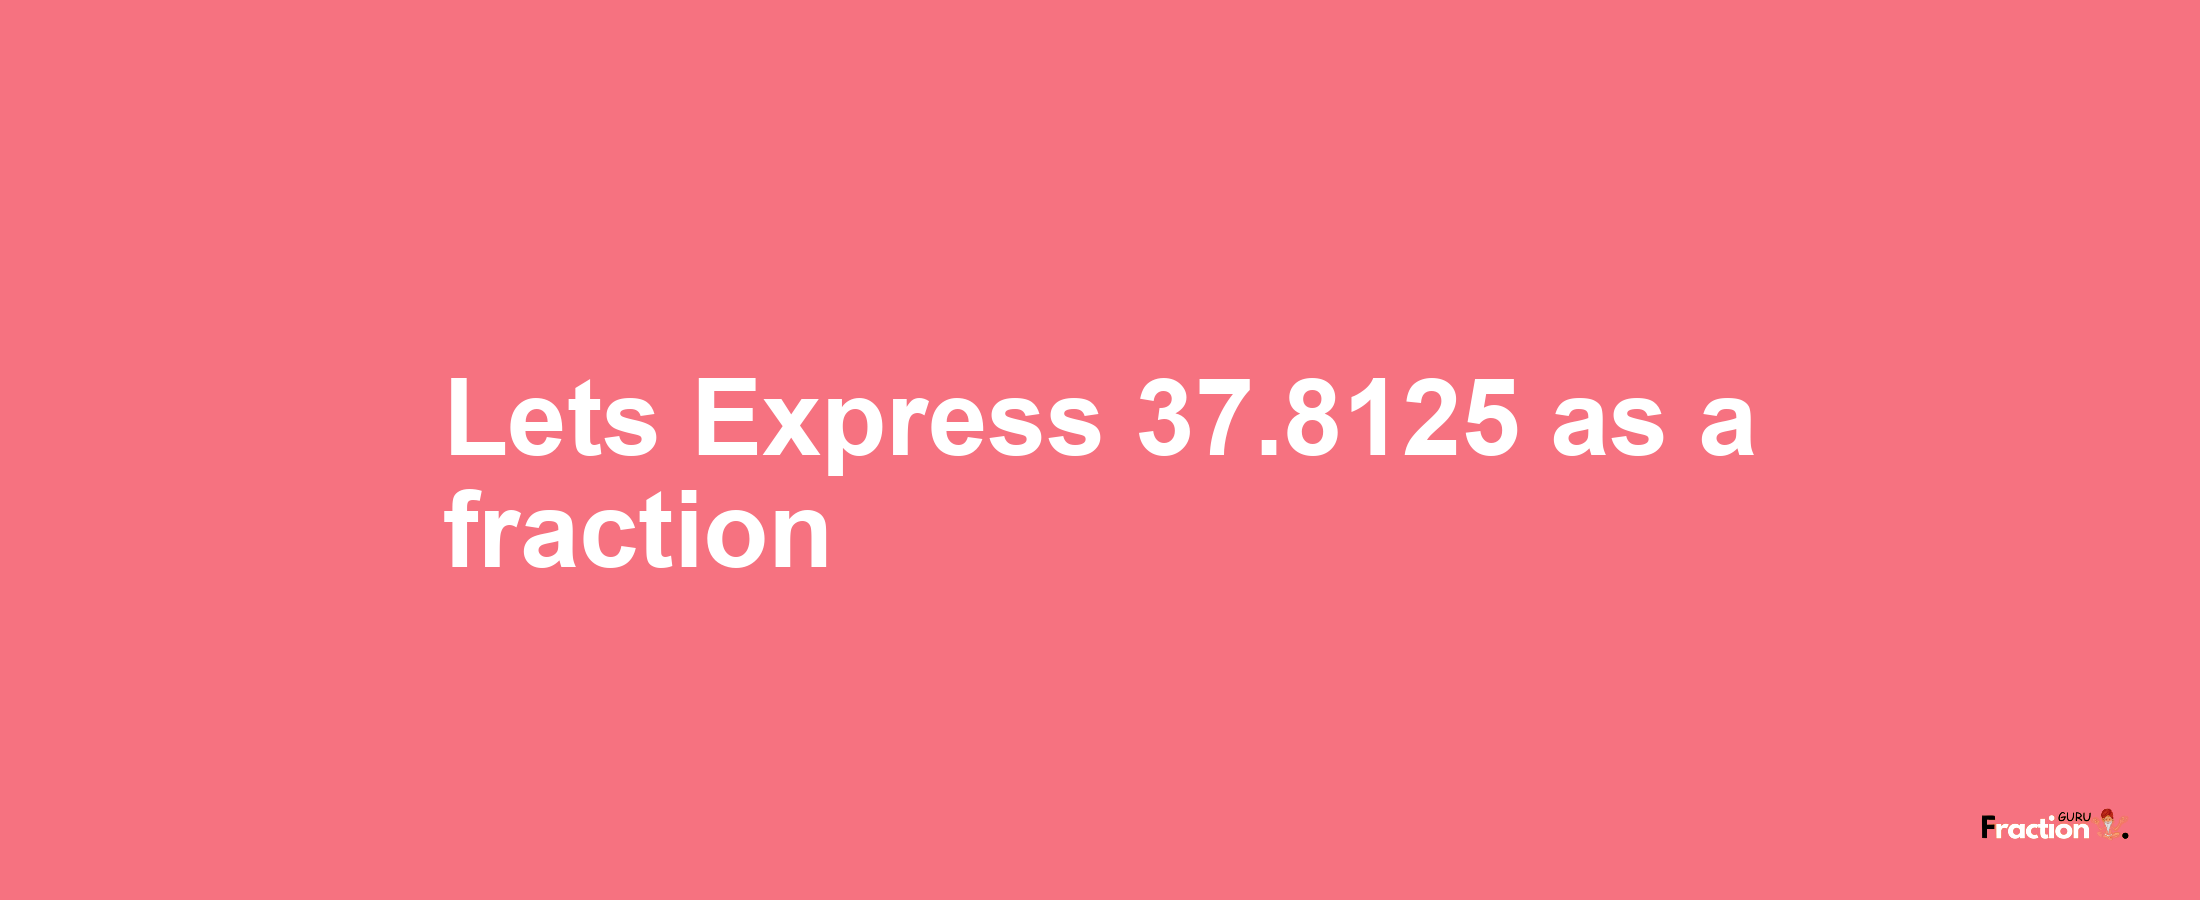 Lets Express 37.8125 as afraction